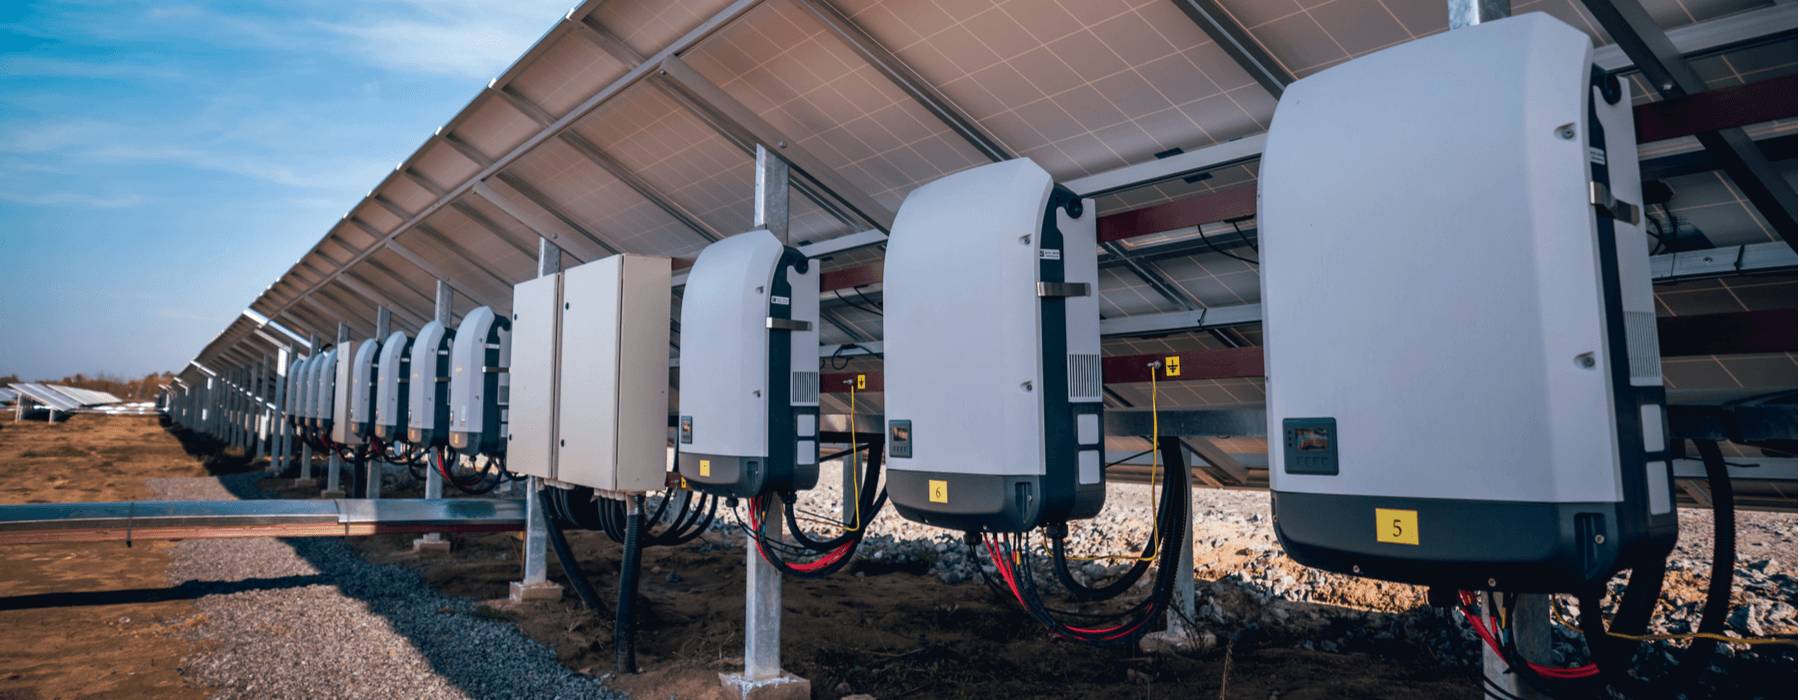 Types of Solar Panel Inverters | Top 3 Cost-Saving Applications 2022